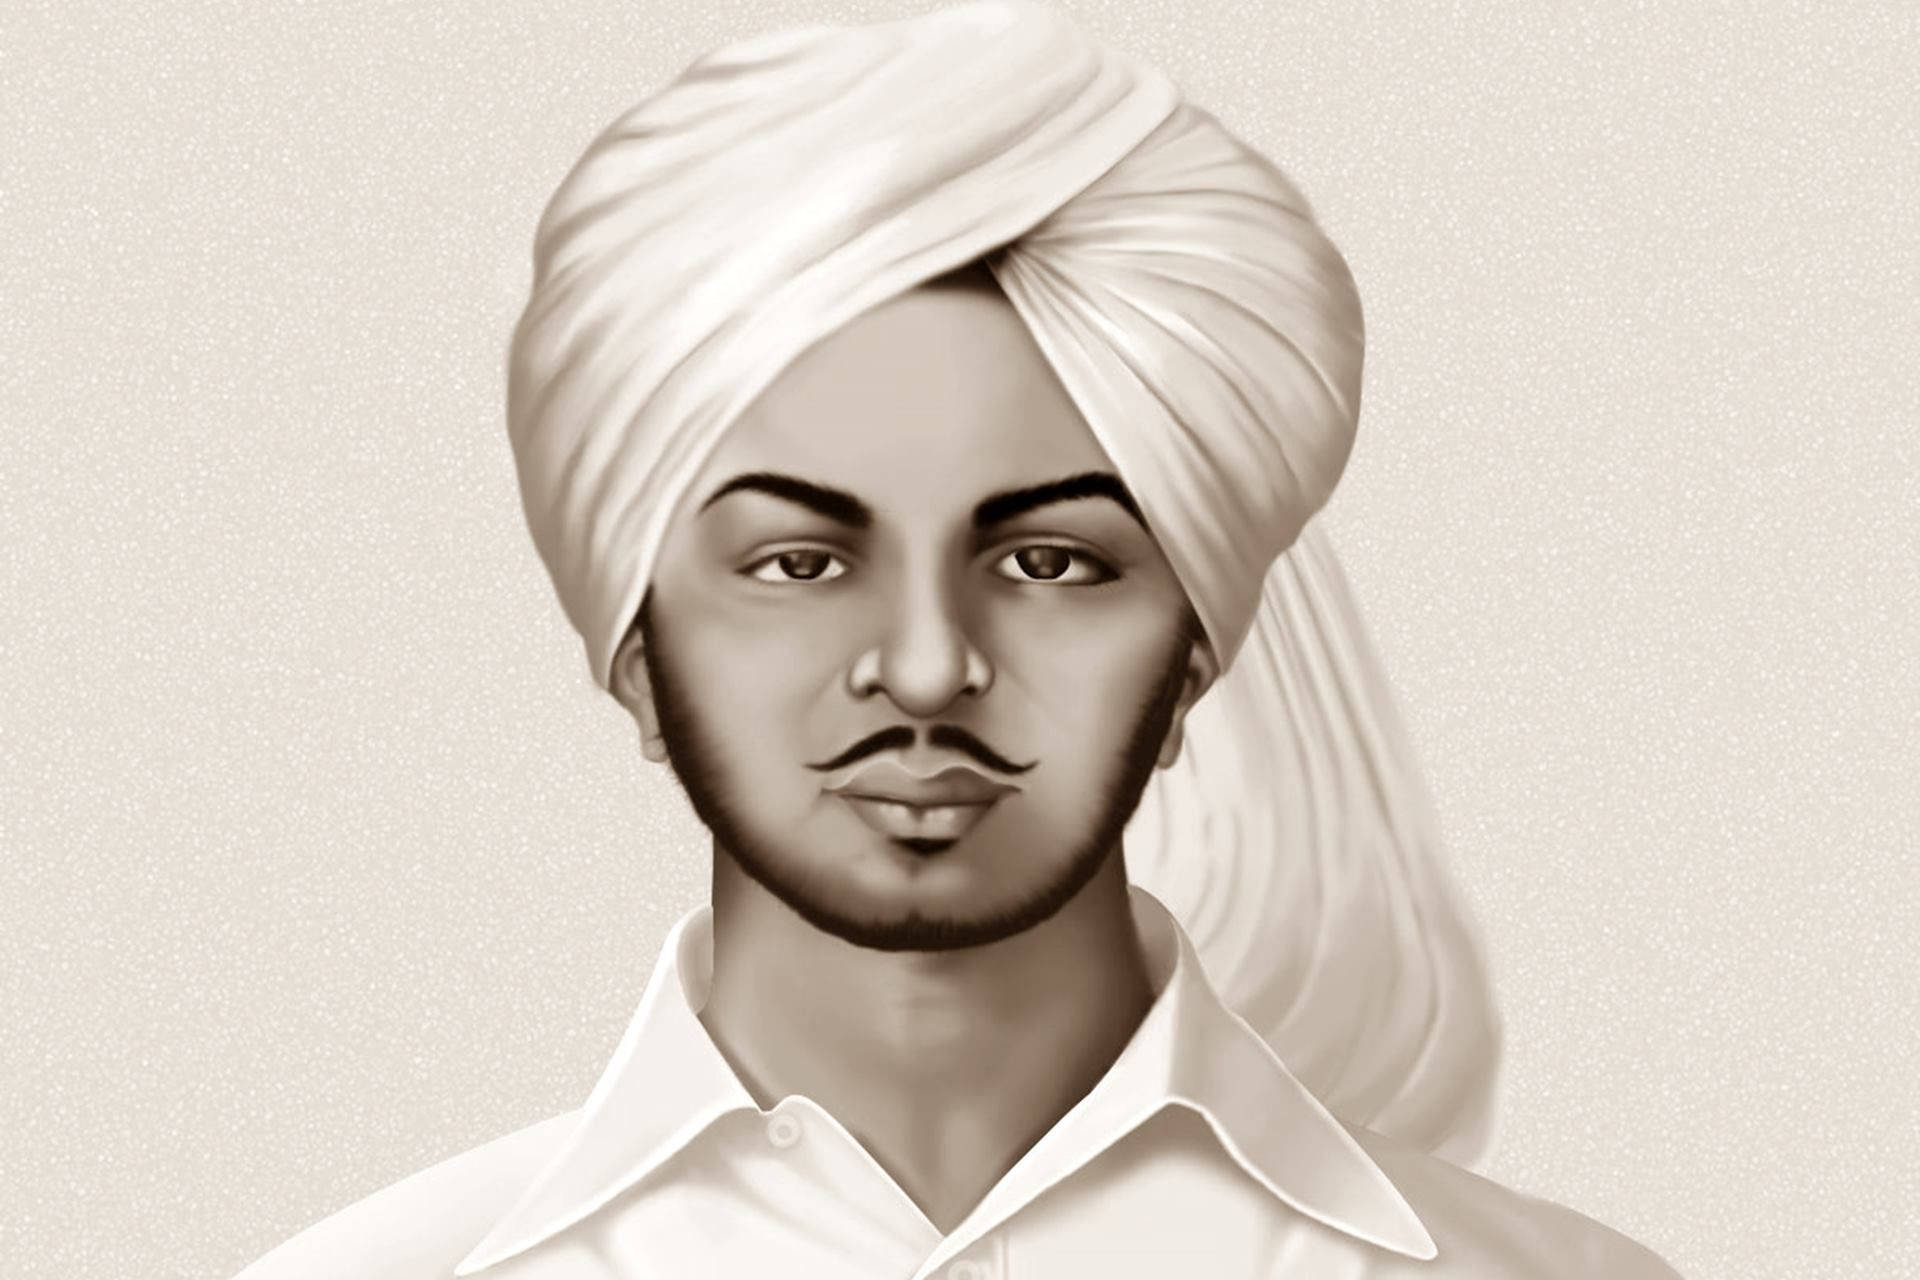 Shaheed Bhagat Singh Dull Poster Background